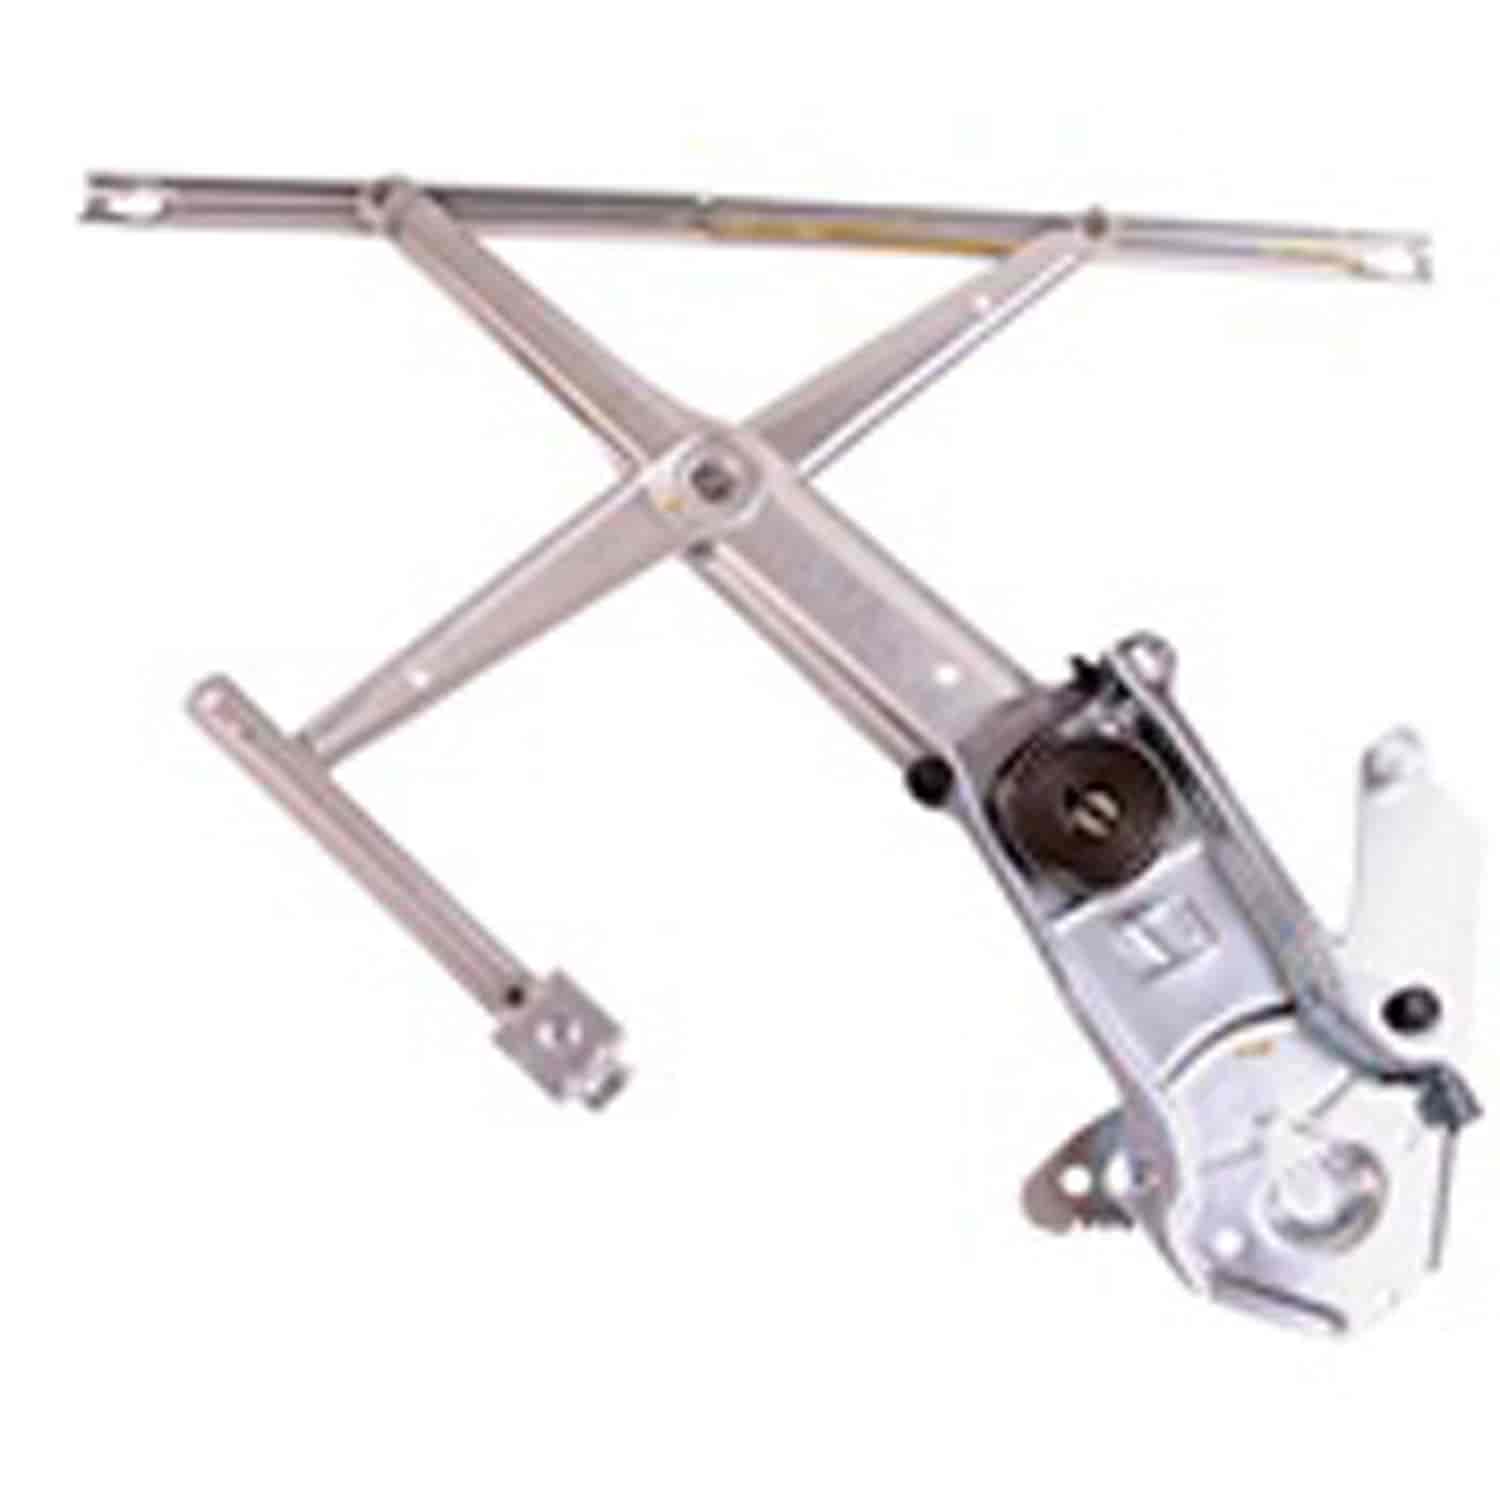 This power window regulator from Omix-ADA fits the